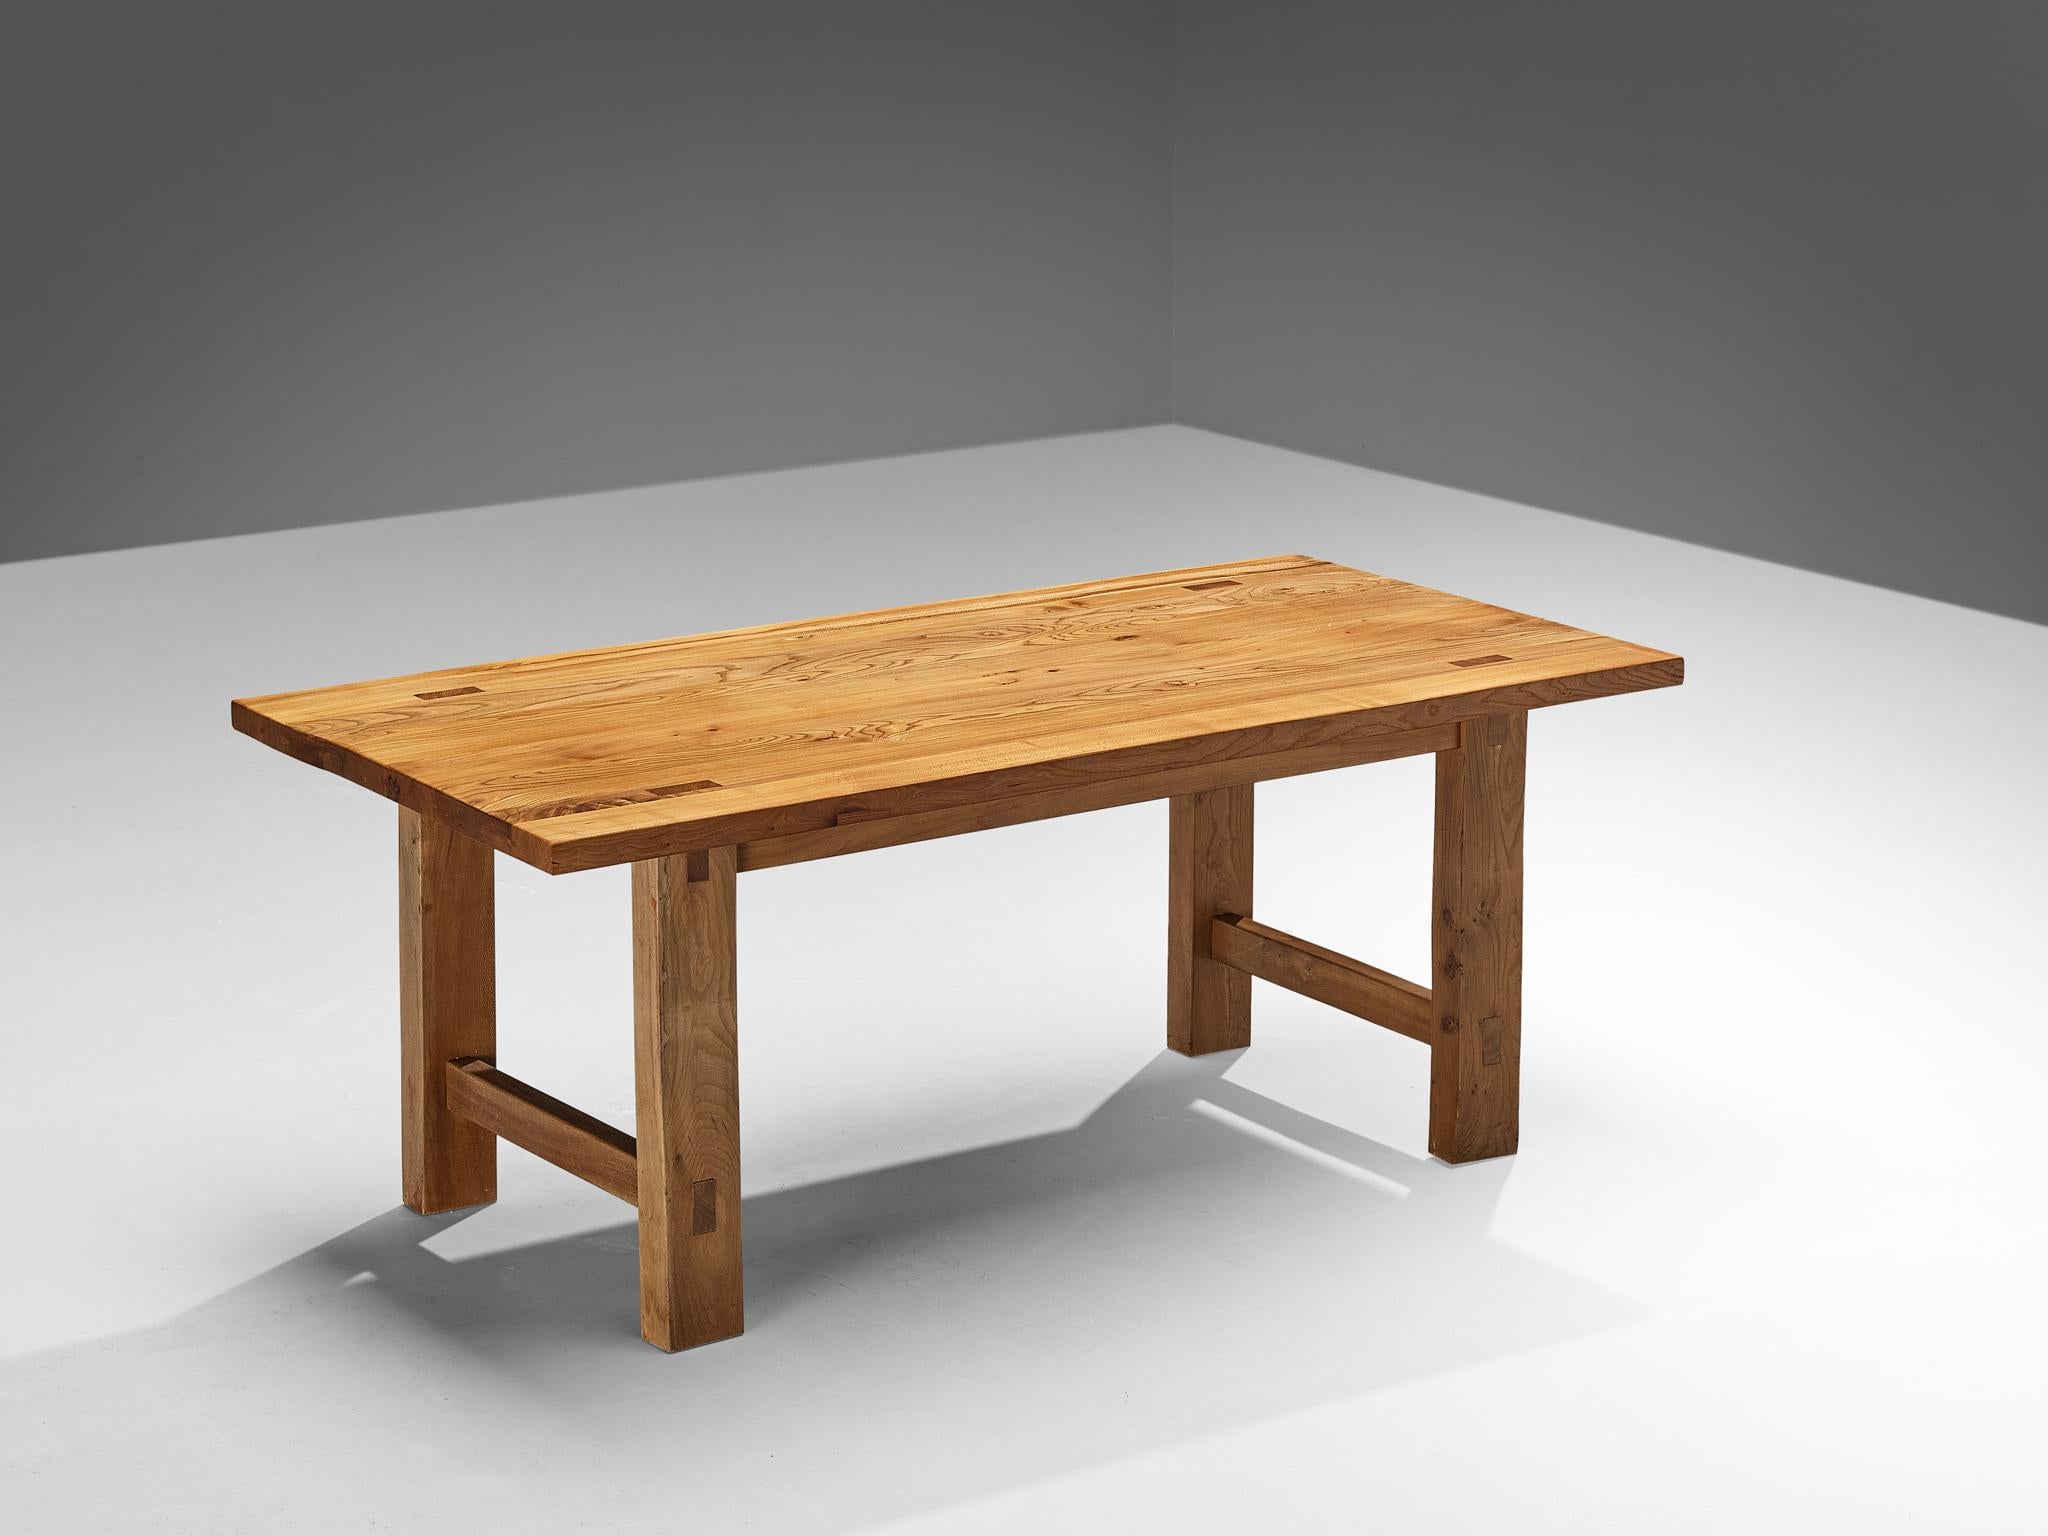 Maison Regain, dining room table, solid elm, France, 1970s

Beautiful dining table by Maison Regain. The base is expressed through clear lines and symmetrical features. The strict angular and open look of the base balances out the density of the